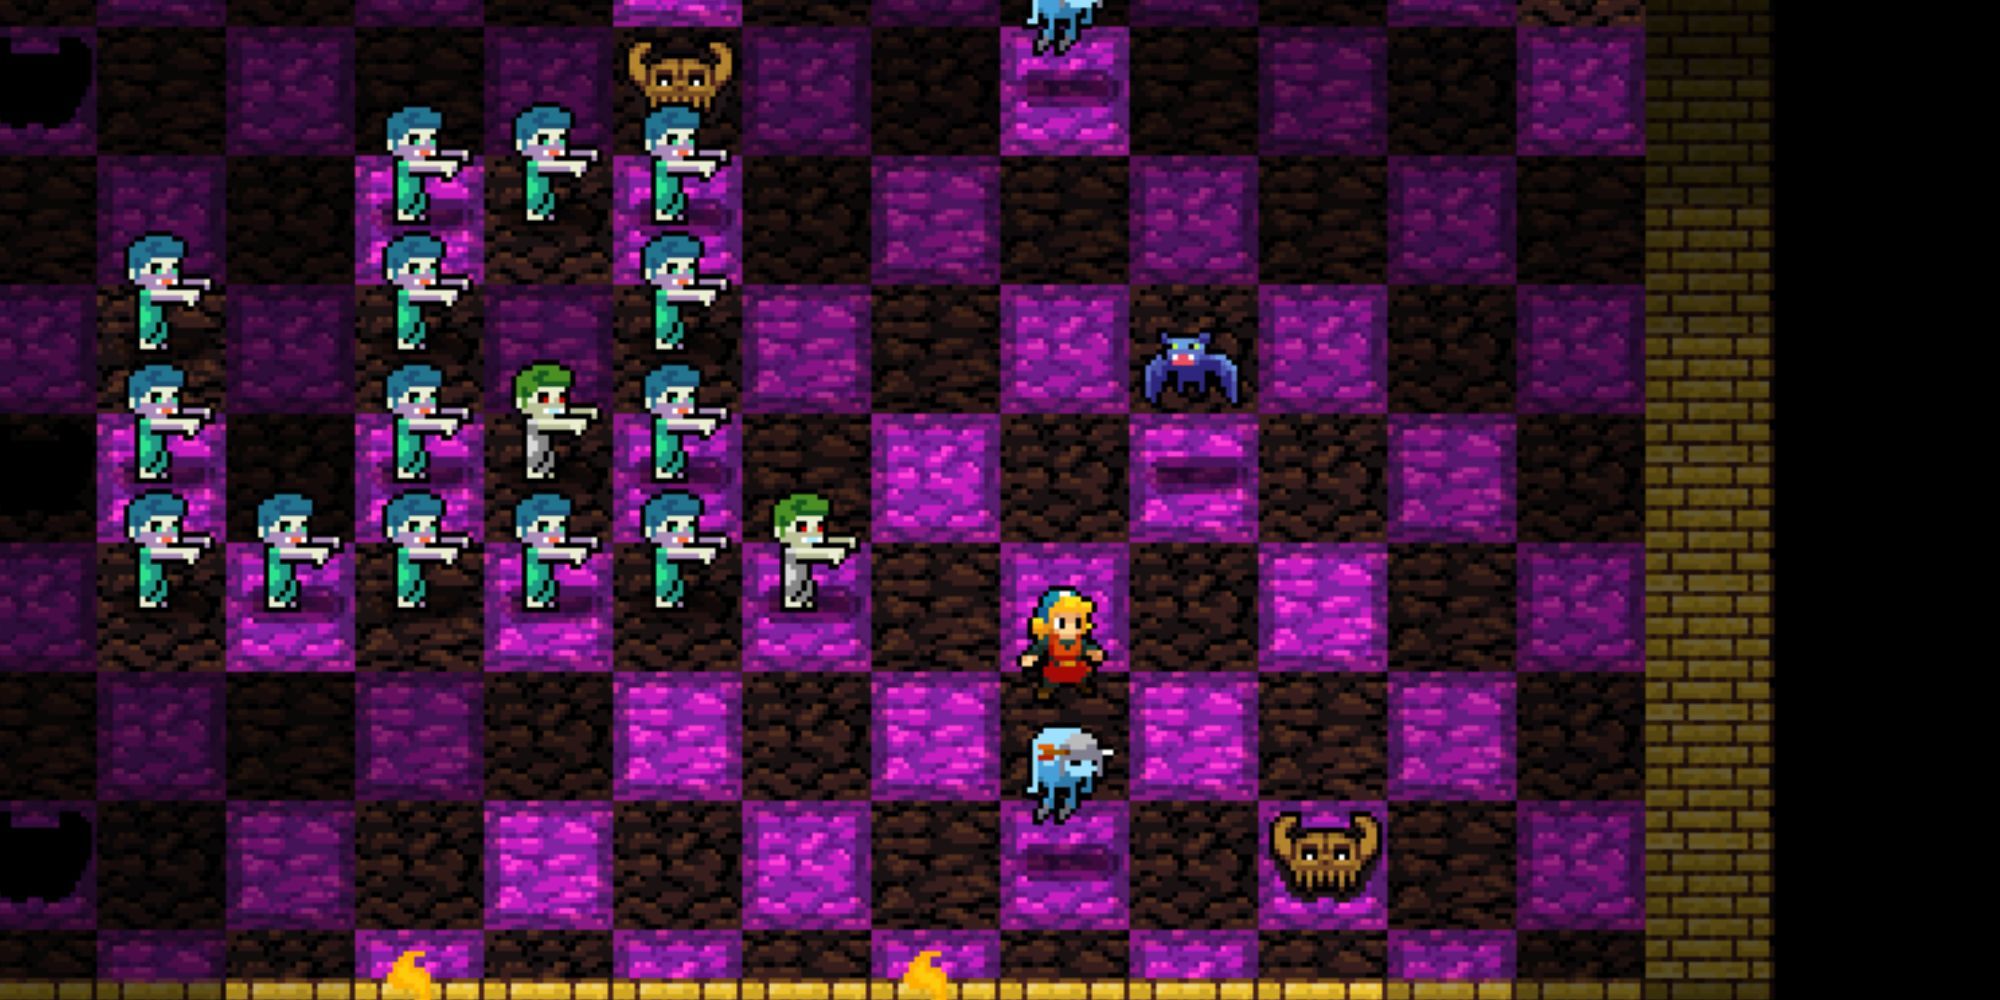 Cadence is pursued by zombies in a dungeon in Crypt of the NecroDancer.